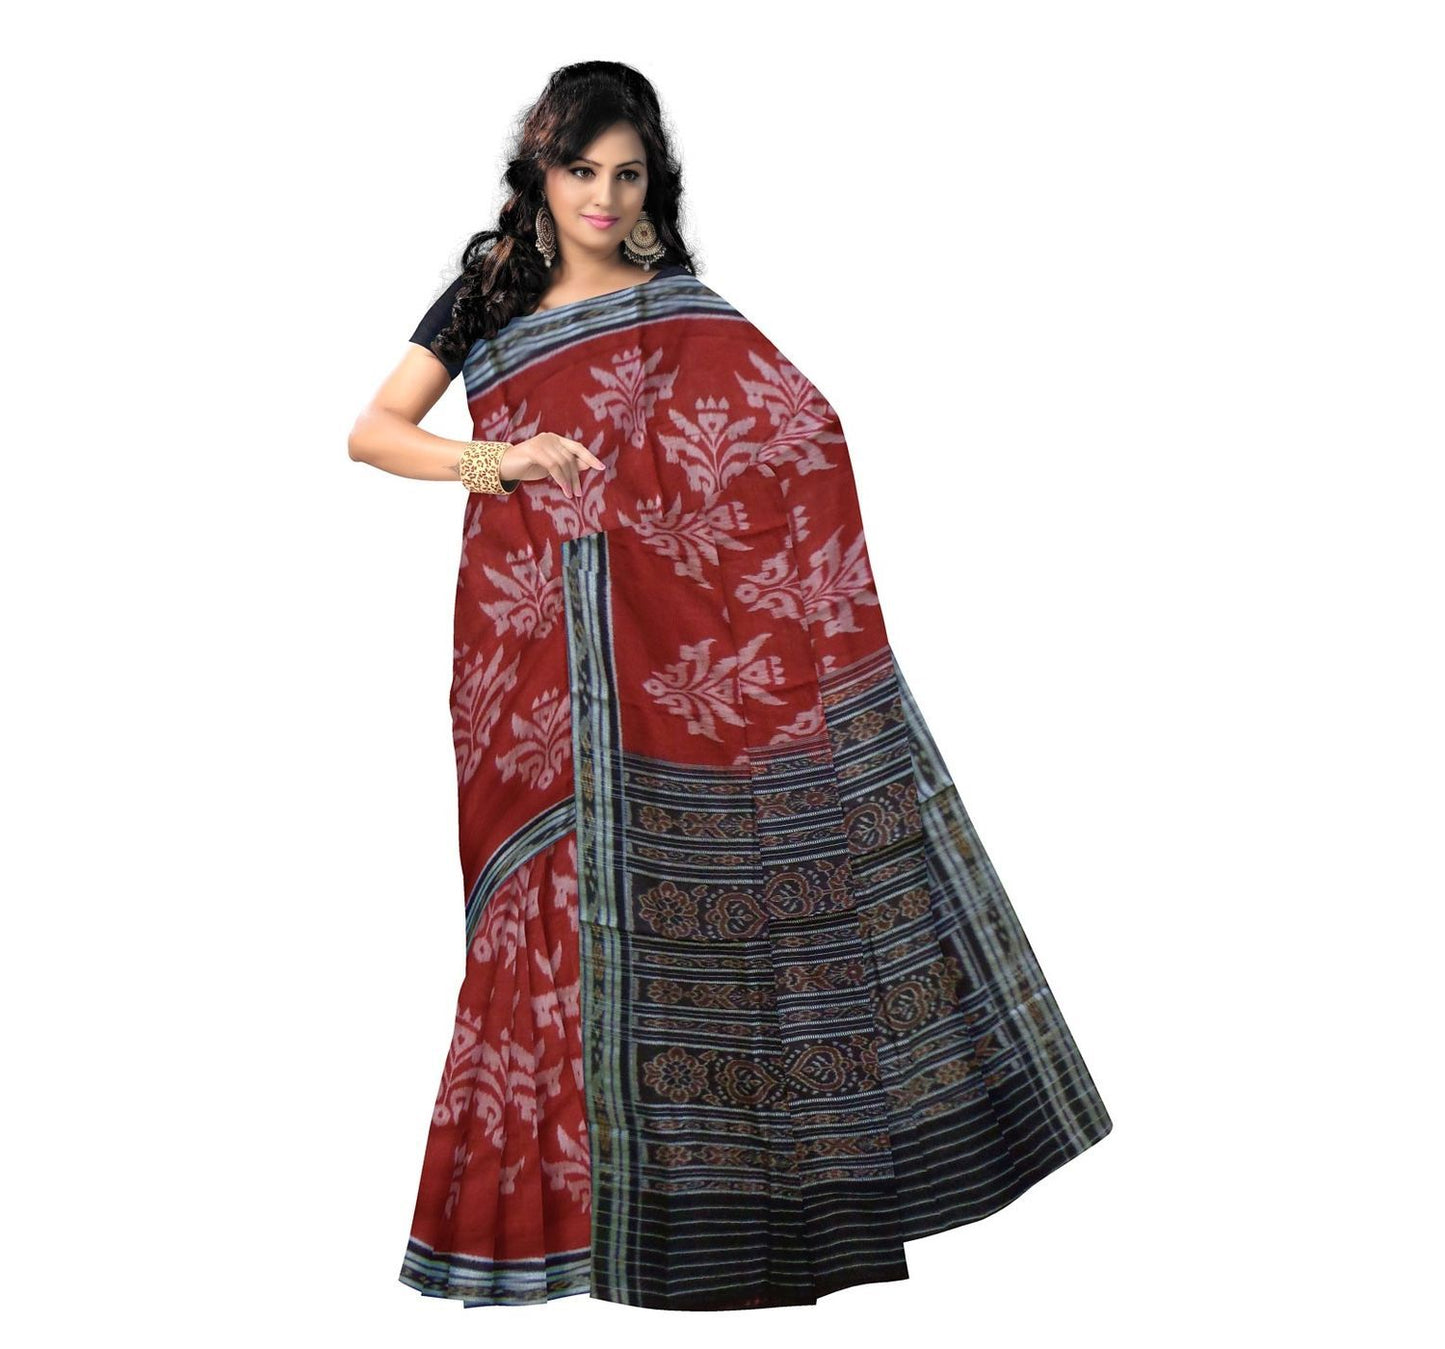 Red with White Floral Designed Handloom Cotton Saree-OSS7465